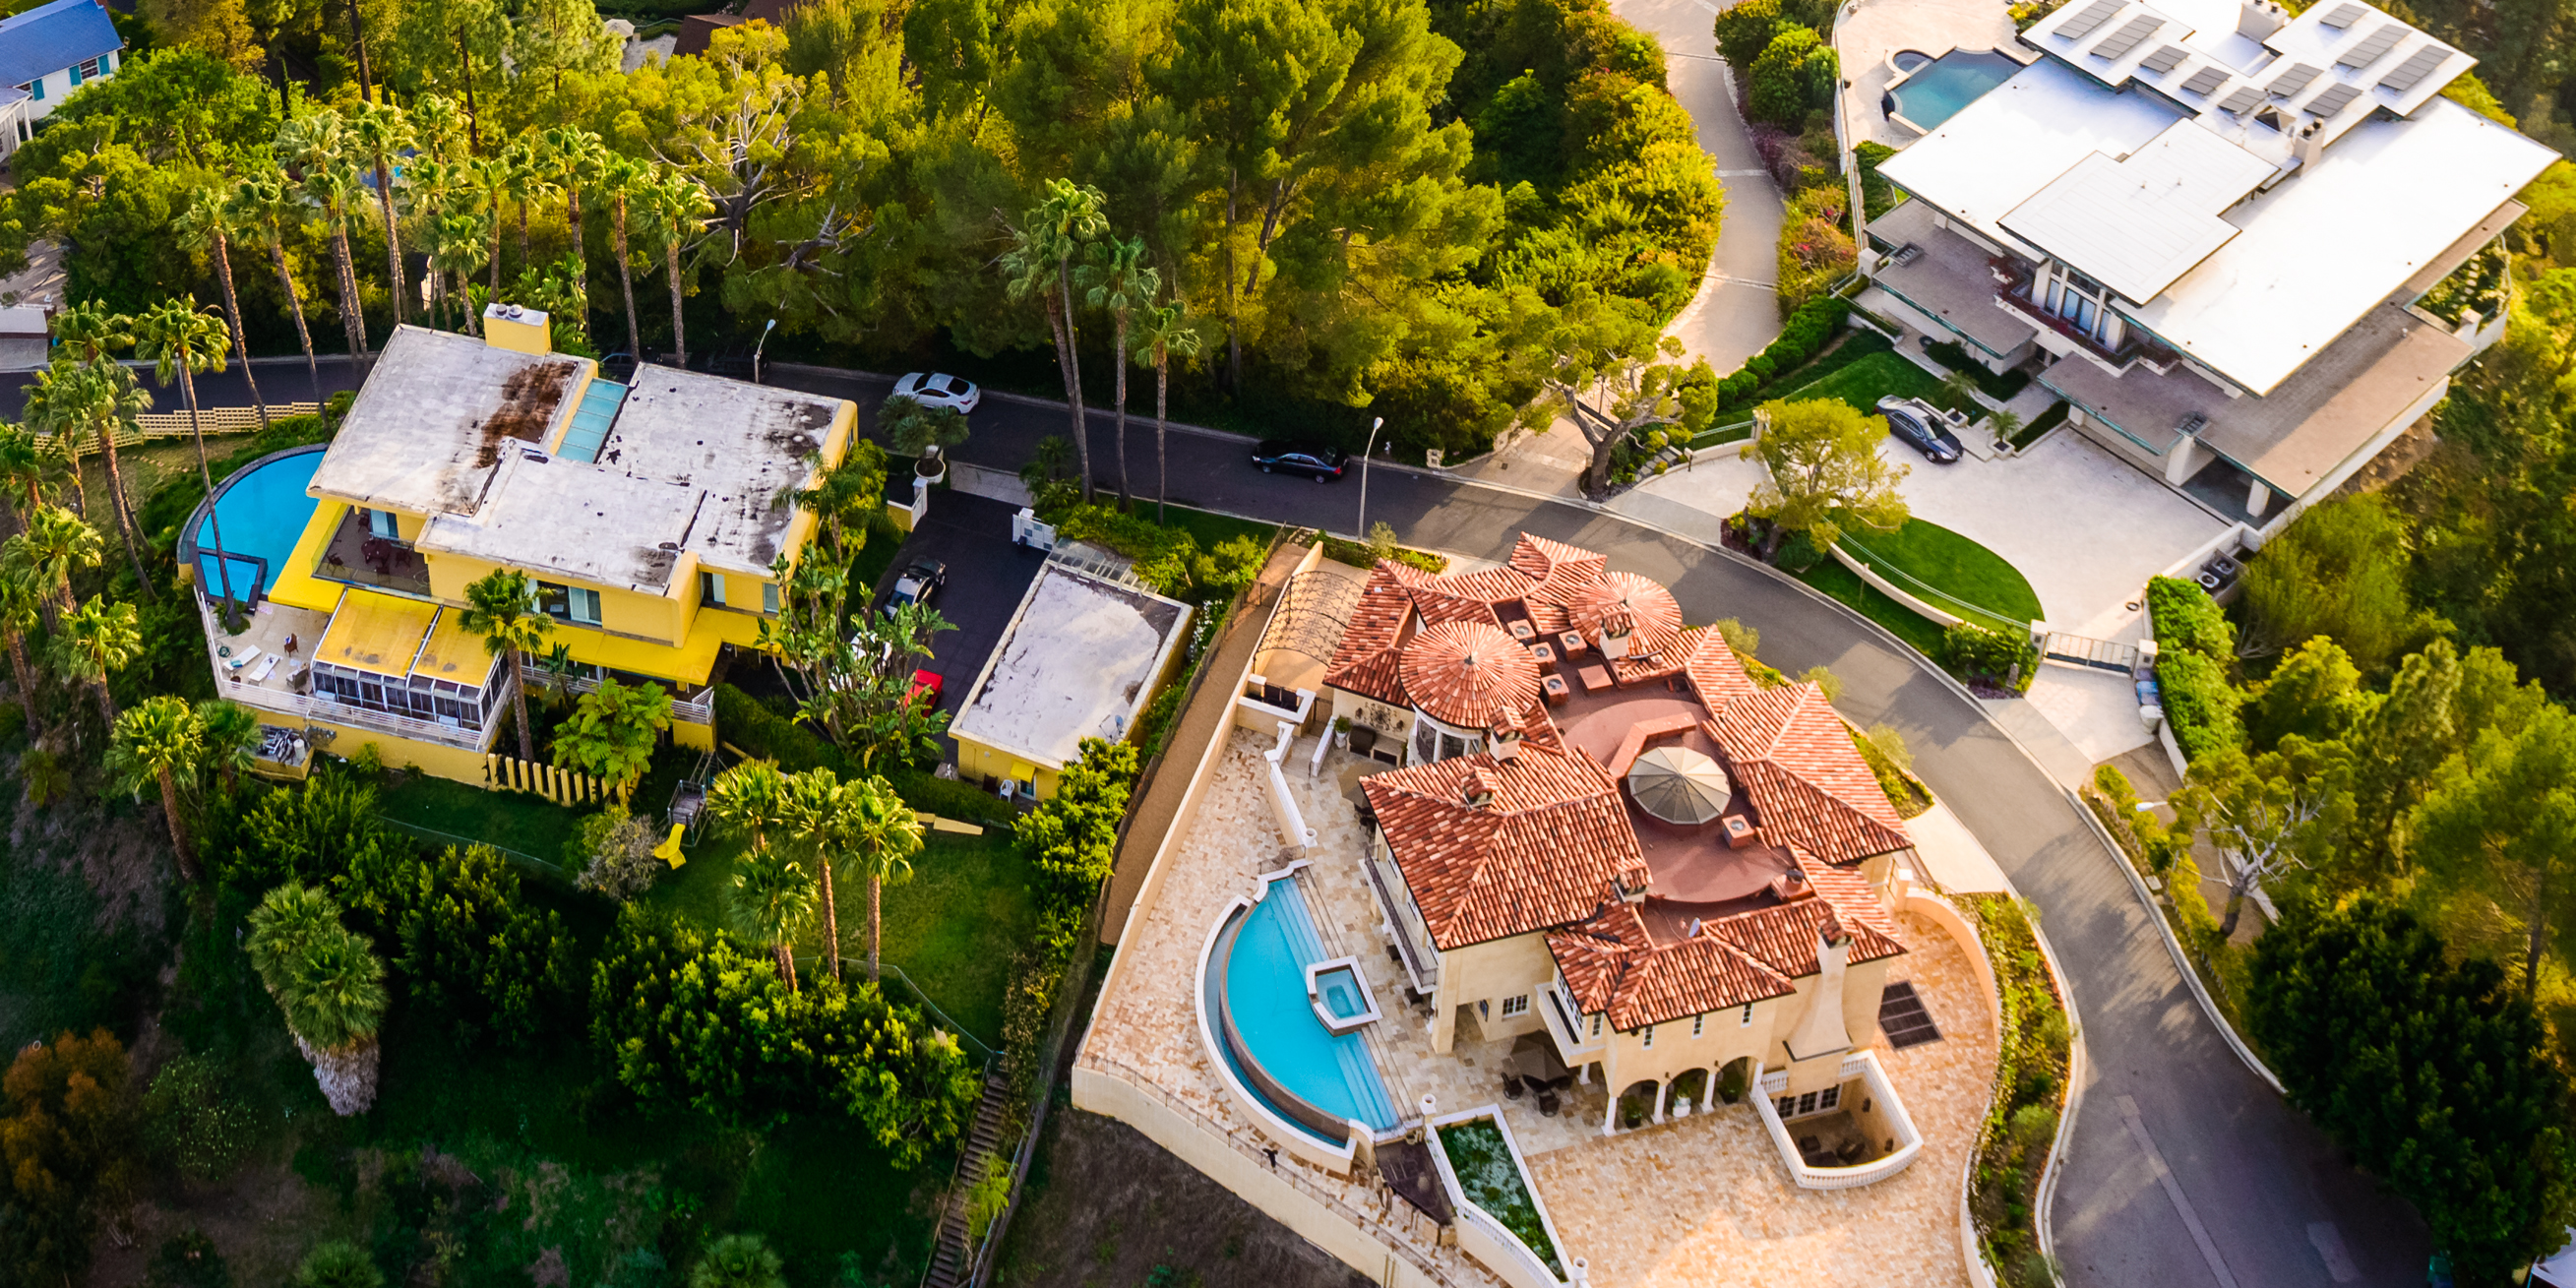 The 25 most expensive ZIP codes in America in 2019